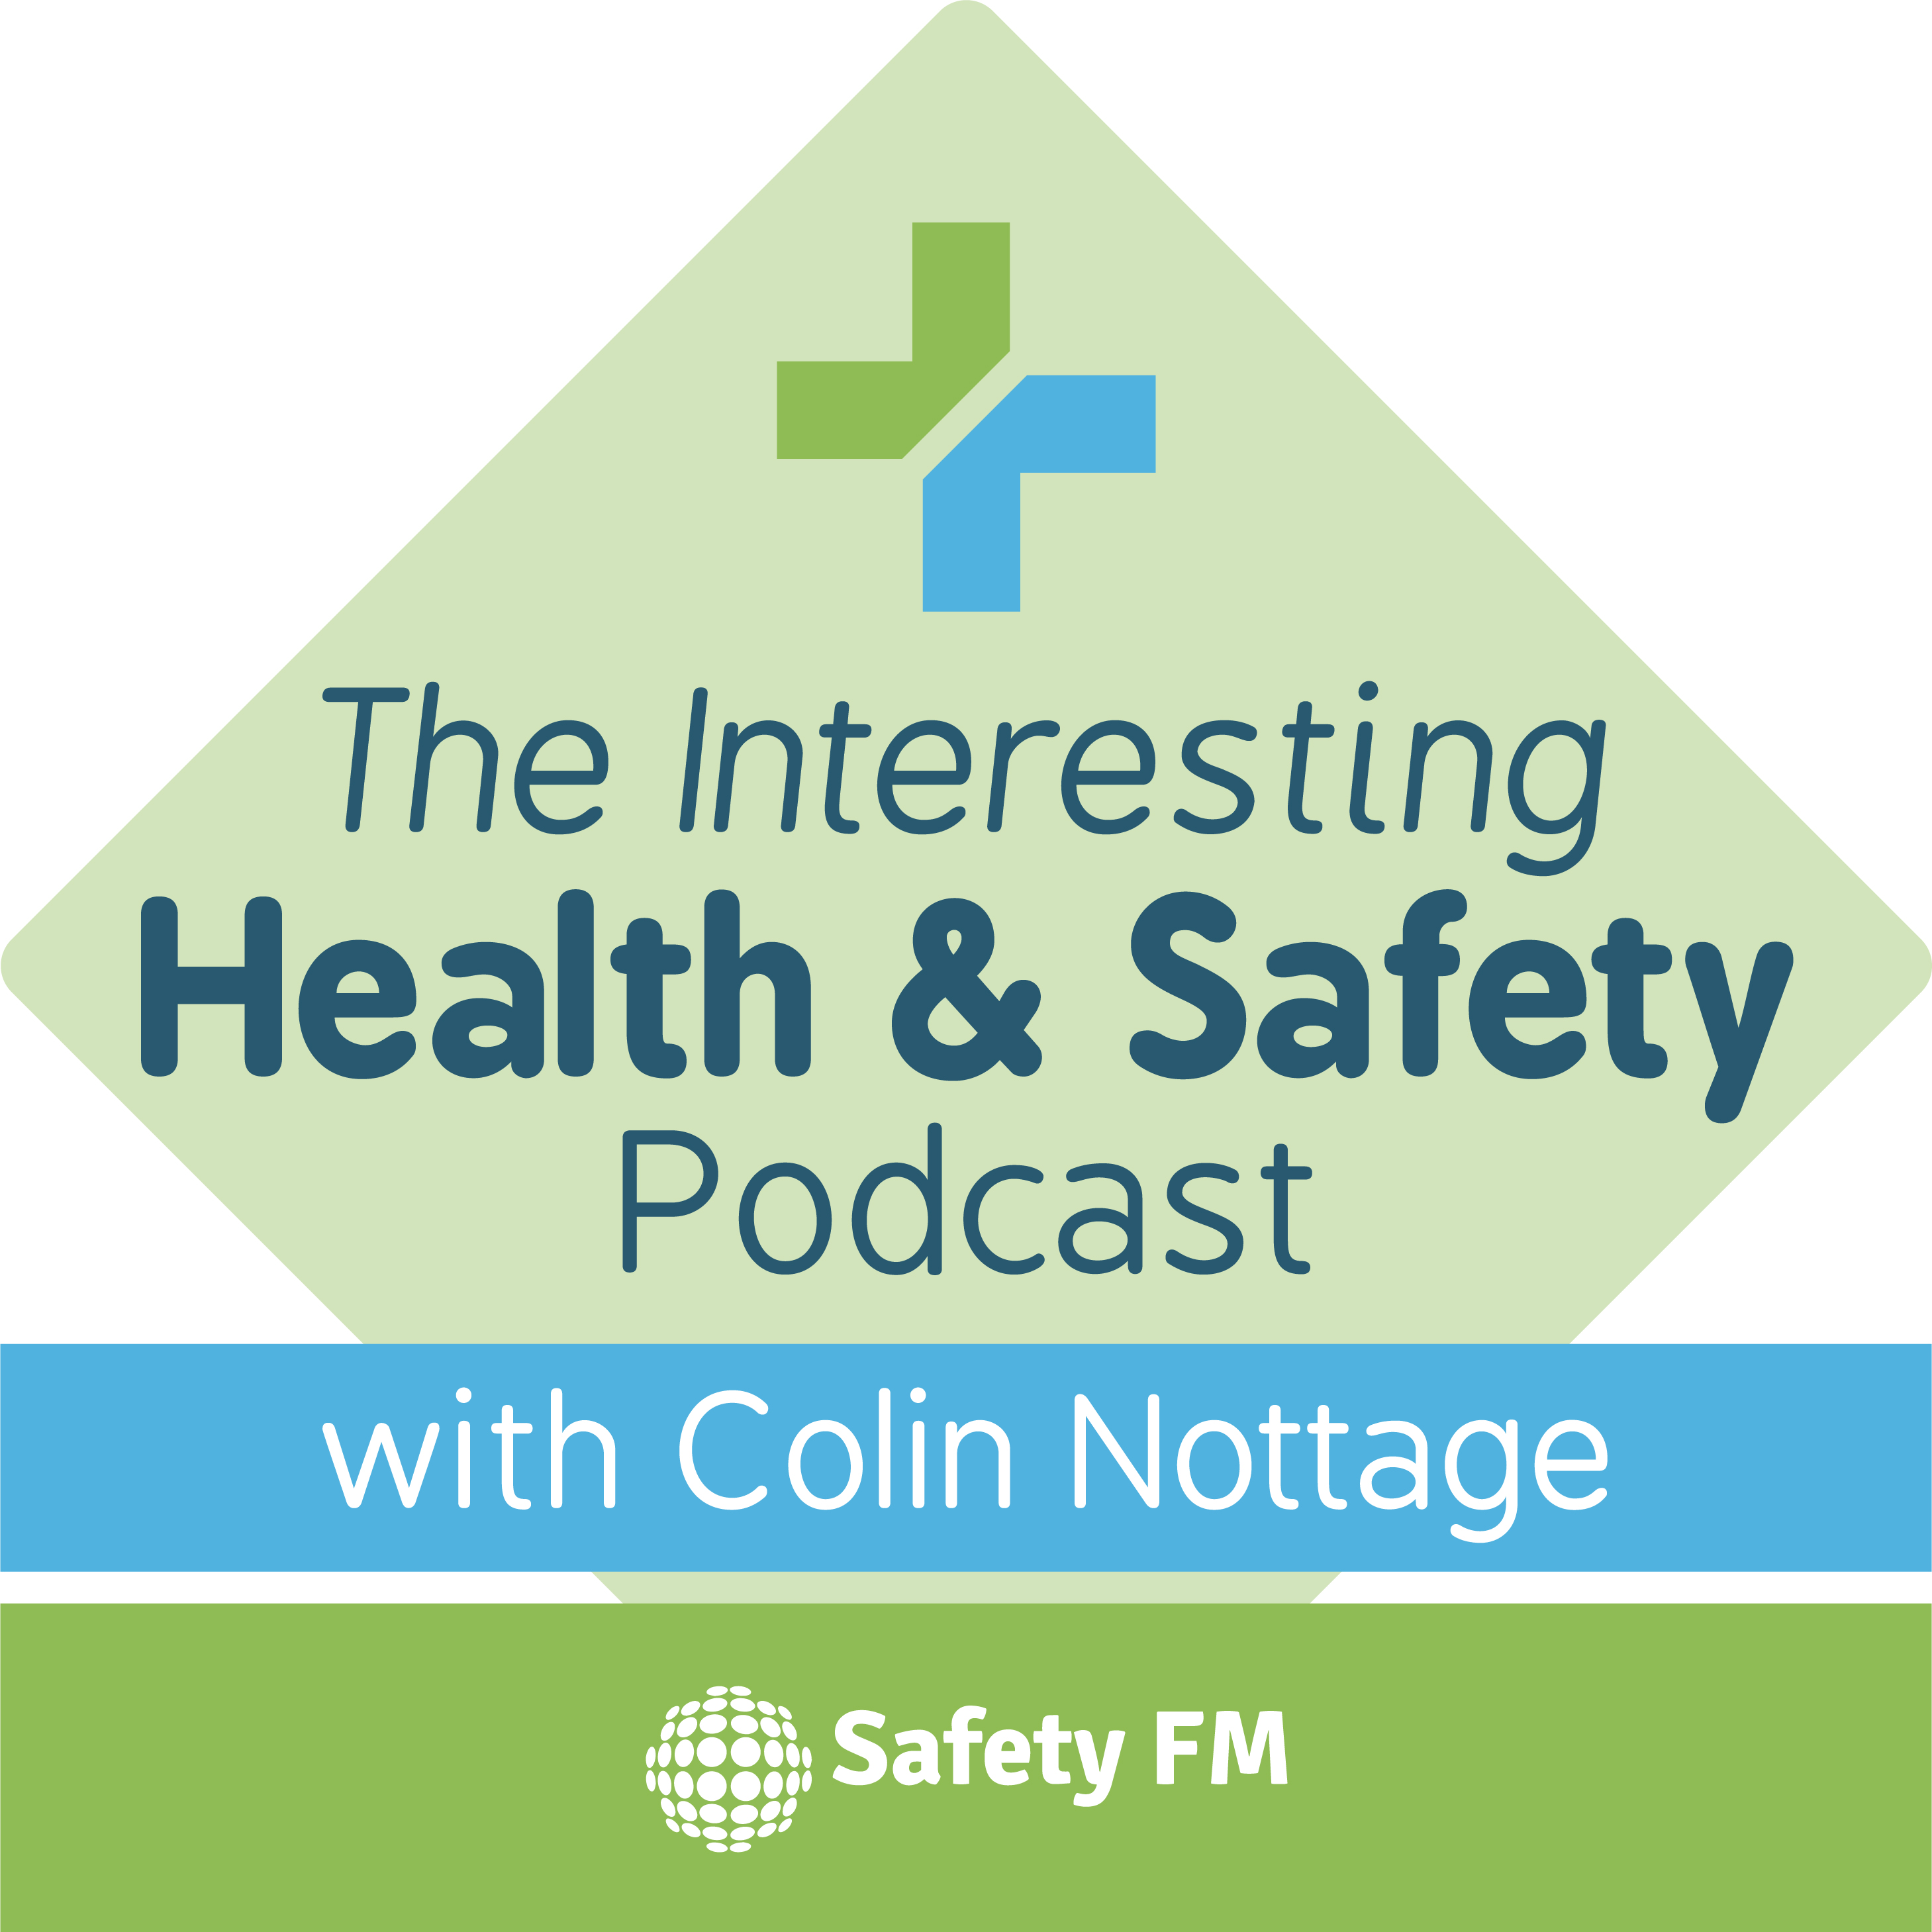 Clive Lloyd - Psychological Safety and Trust